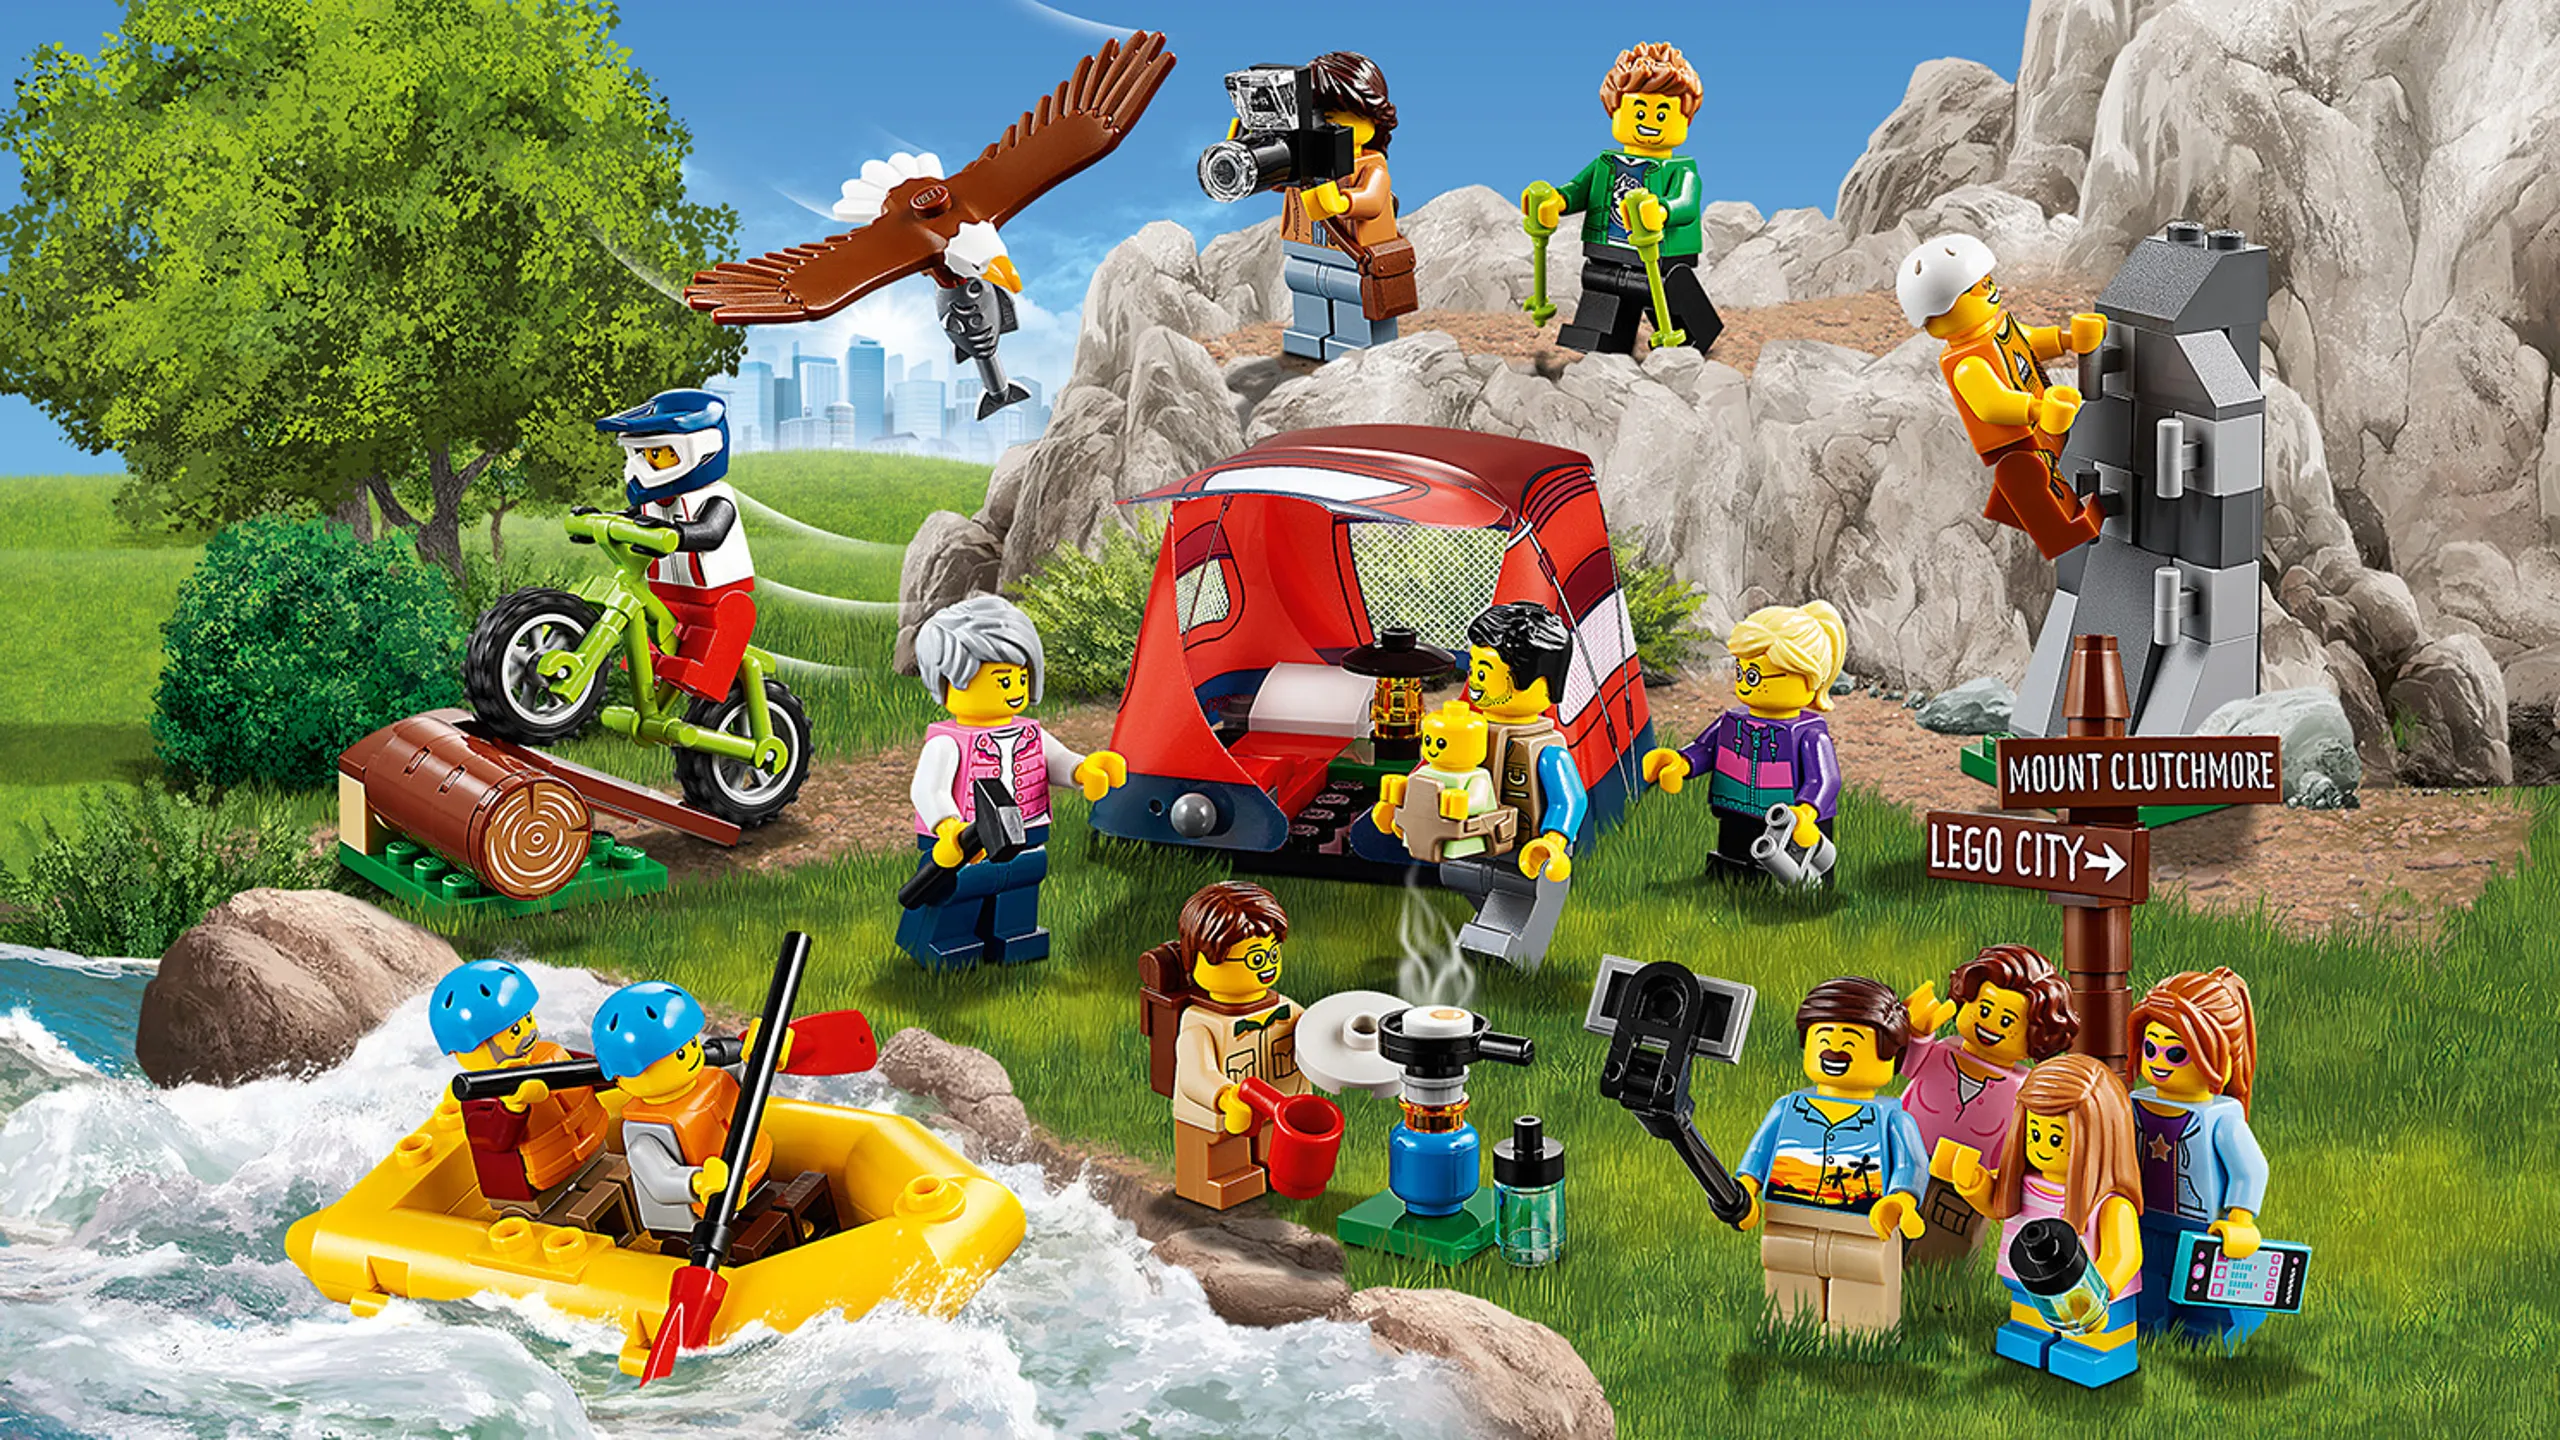 LEGO City Town - 60202 People Pack: Outdoor Adventures - Go camping in nature! Put up your tent, make dinner, see an eagle, climb in the mountains, take selfies or river raft.